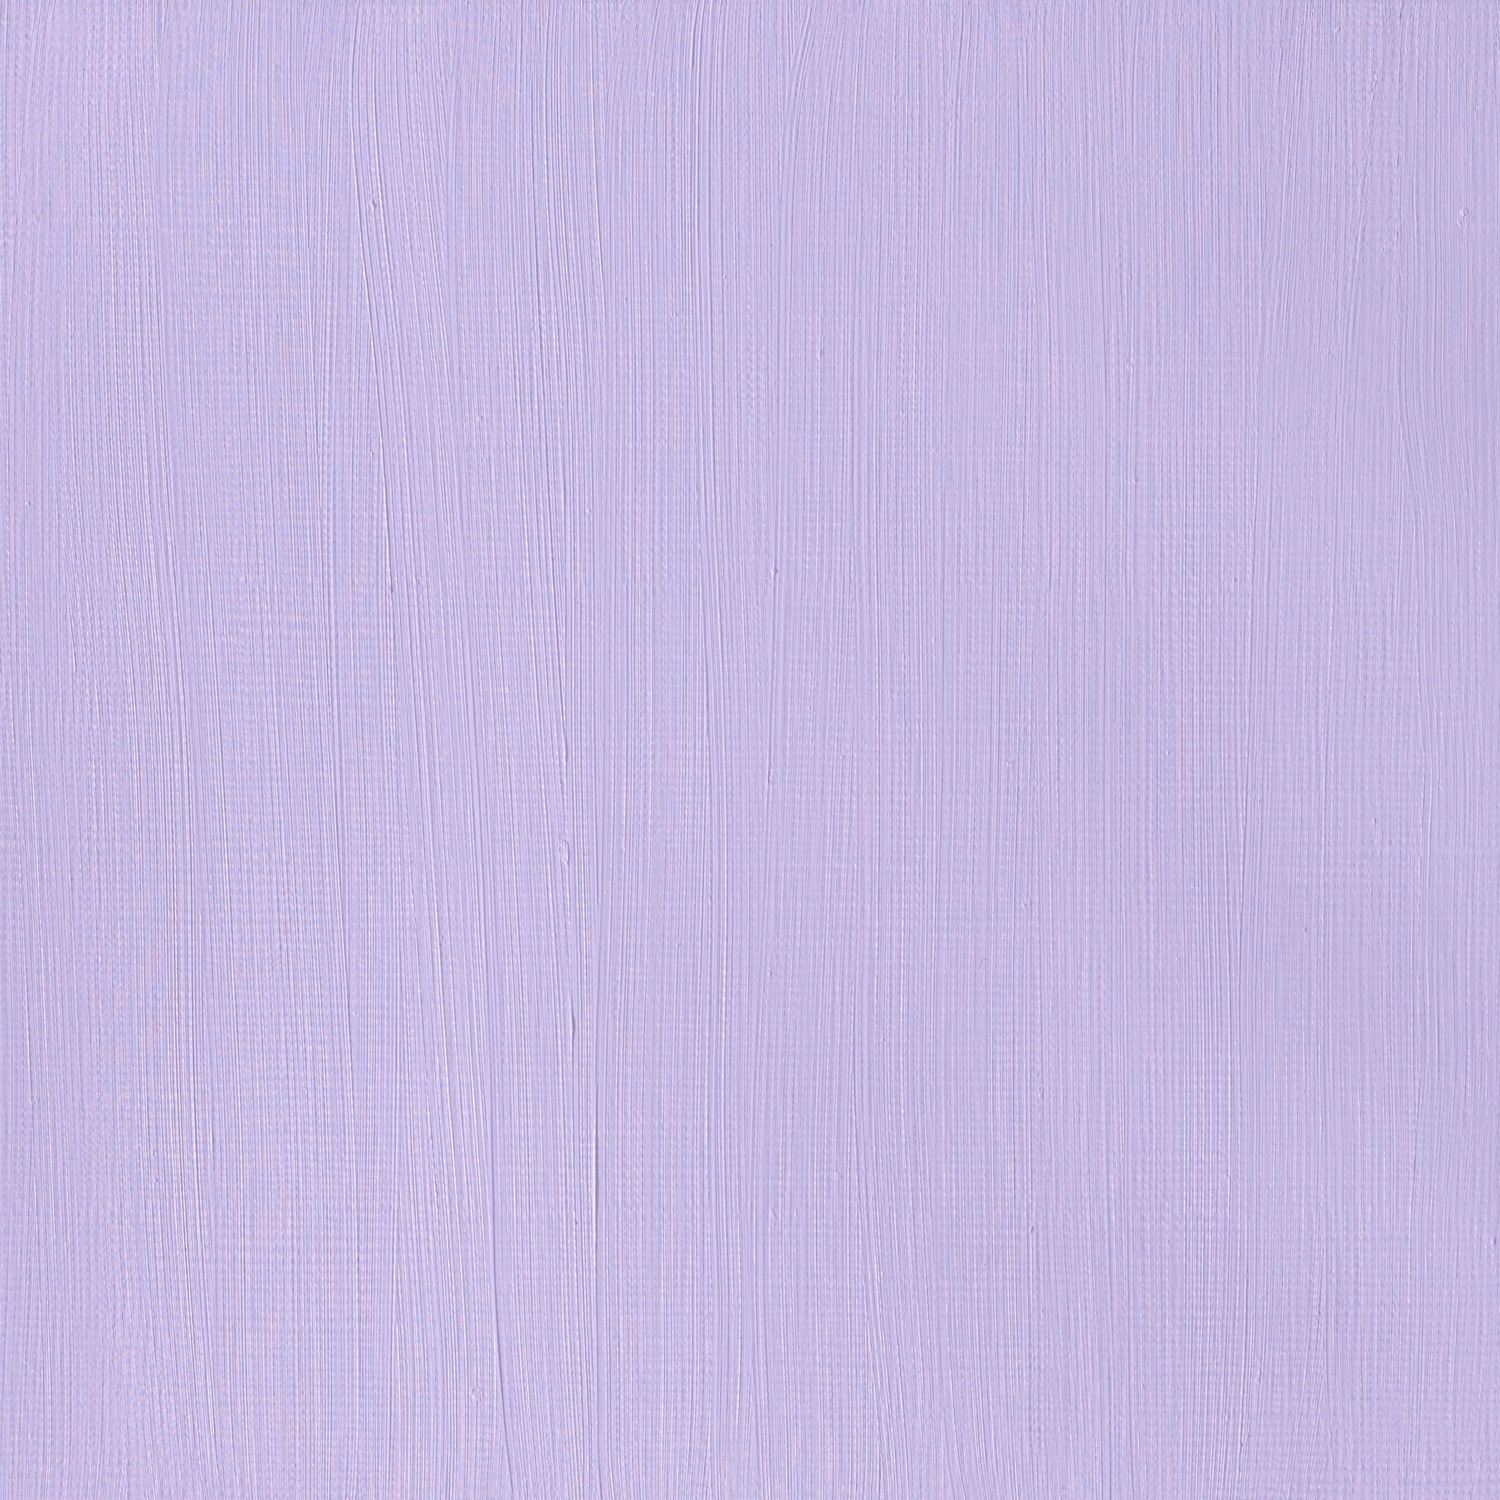 Winsor and Newton 60ml Galeria Acrylic Paint - Winsor Violet Image 3